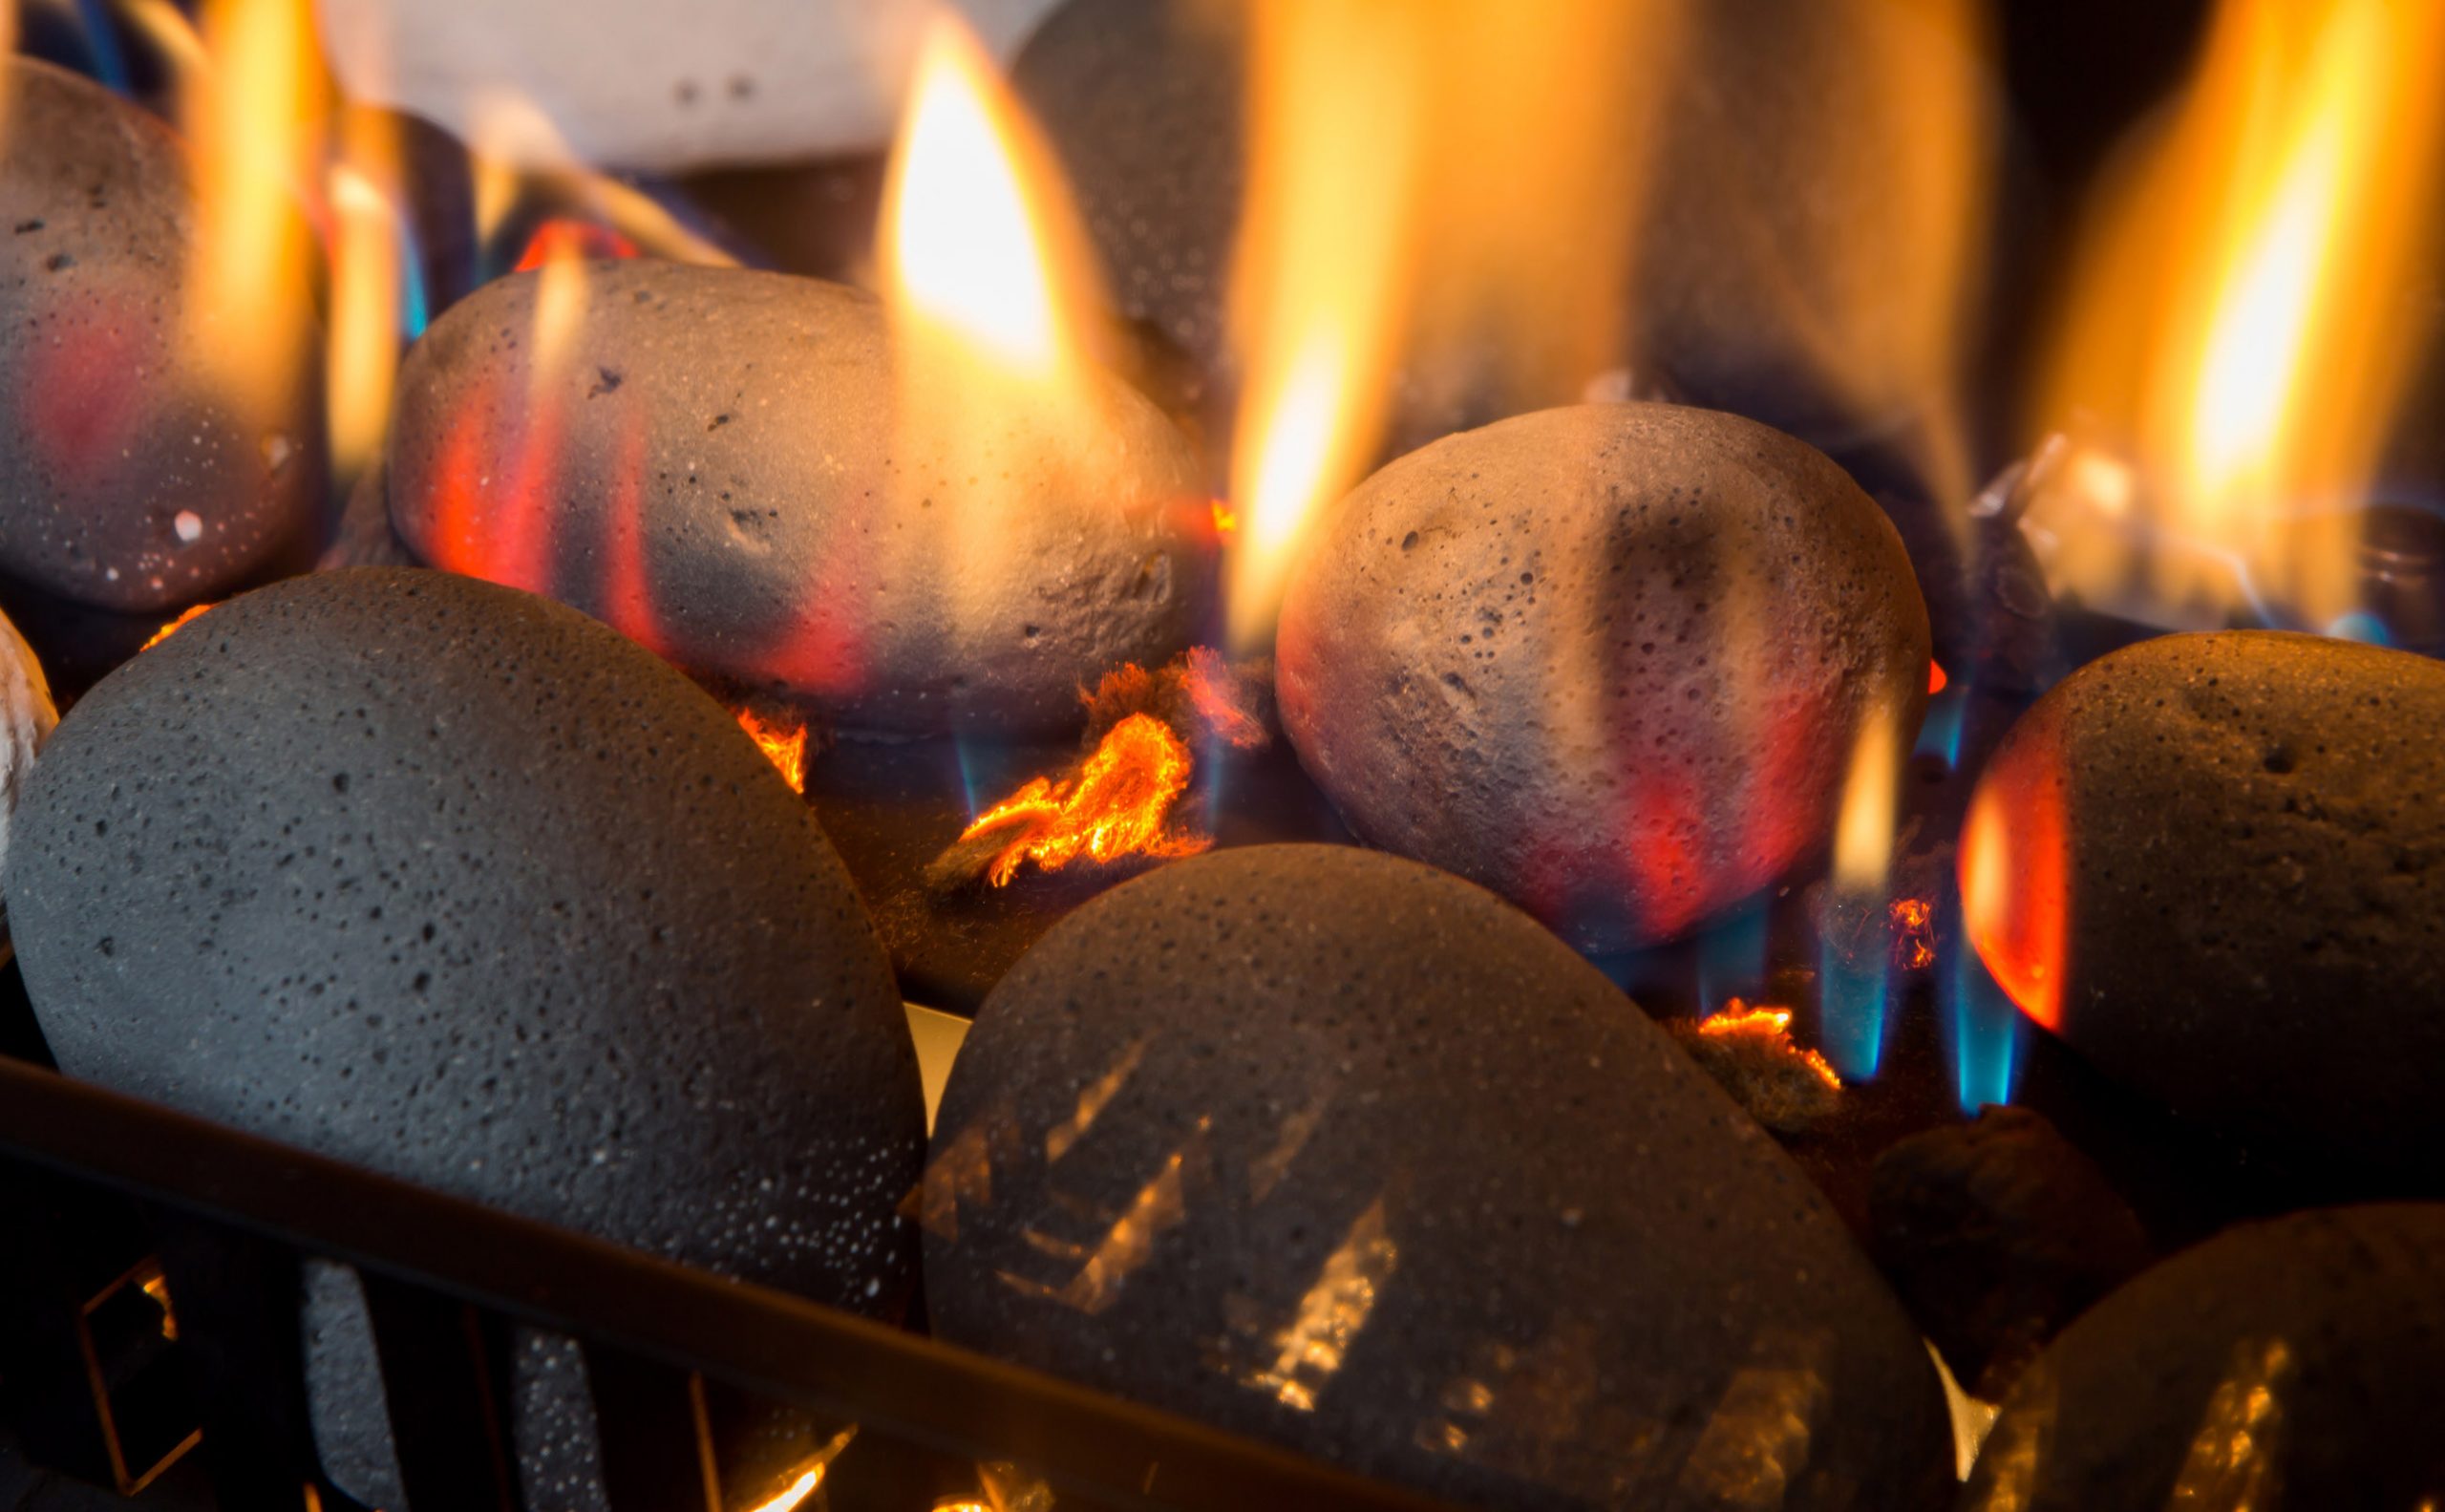 650-750-Gas-Fire-Ember-details-Pebble-Stones-Close-Up-7-scaled